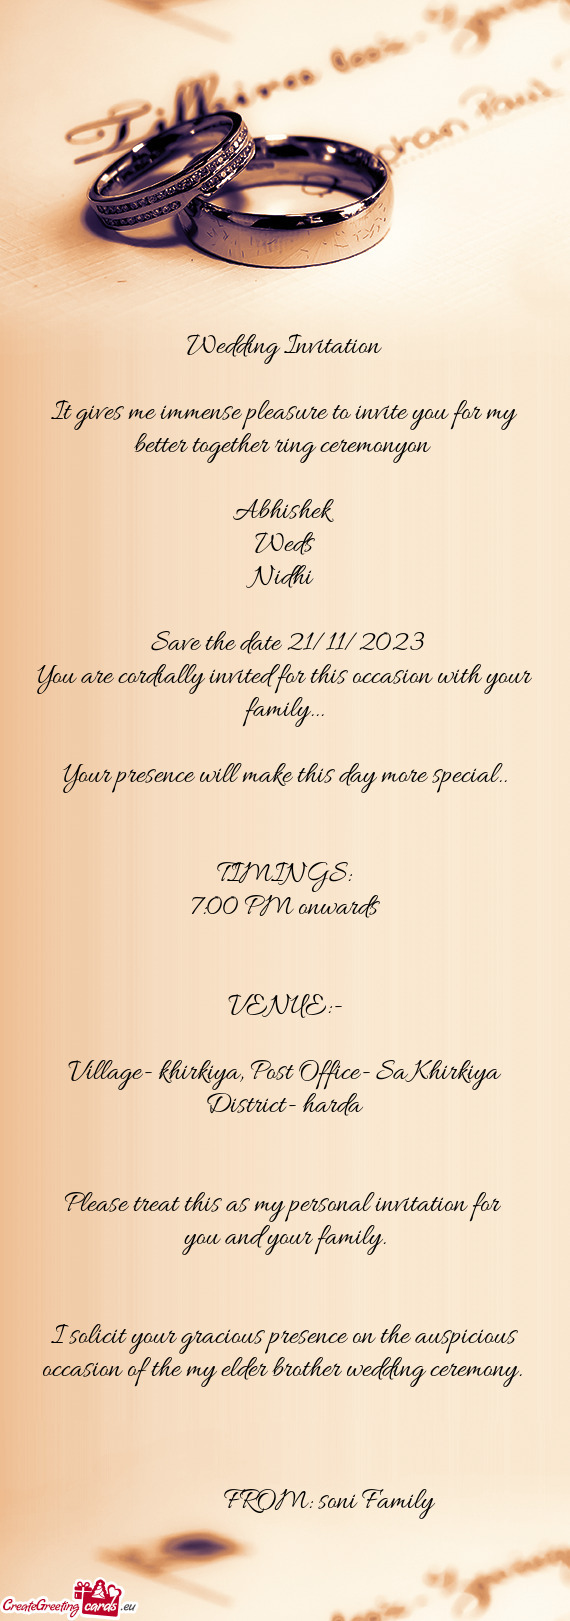 It gives me immense pleasure to invite you for my better together ring ceremonyon